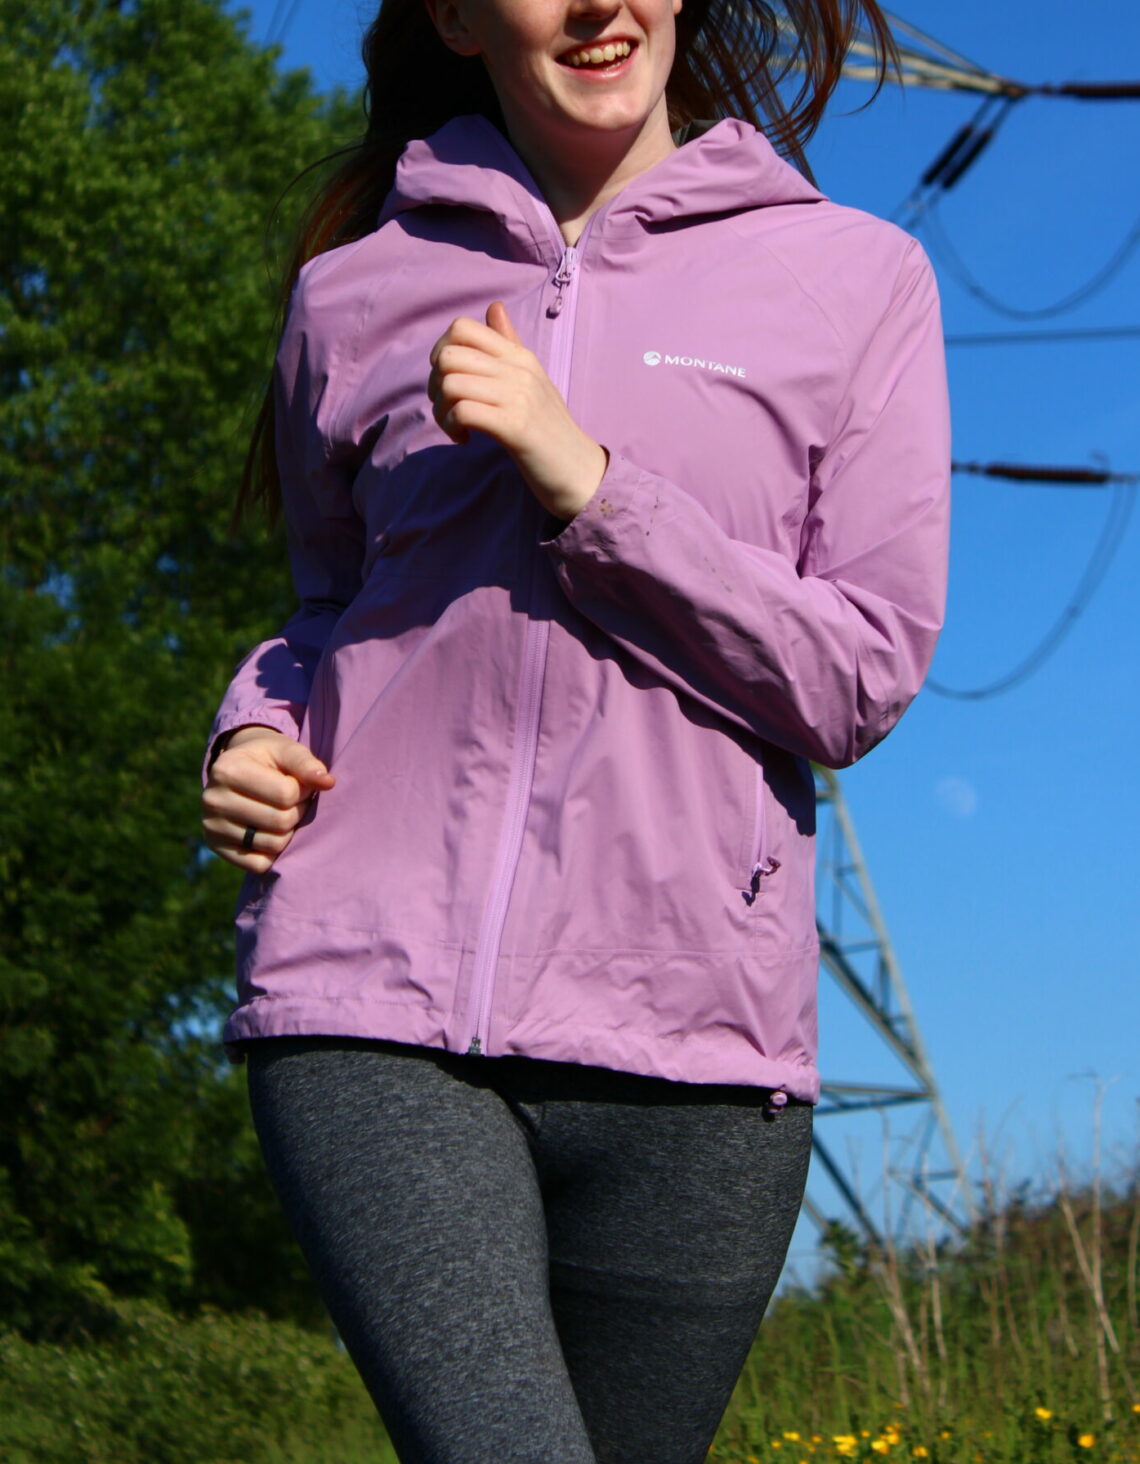 Montane Minimus Lite Waterproof - Test and Review - Ultra Runner Mag